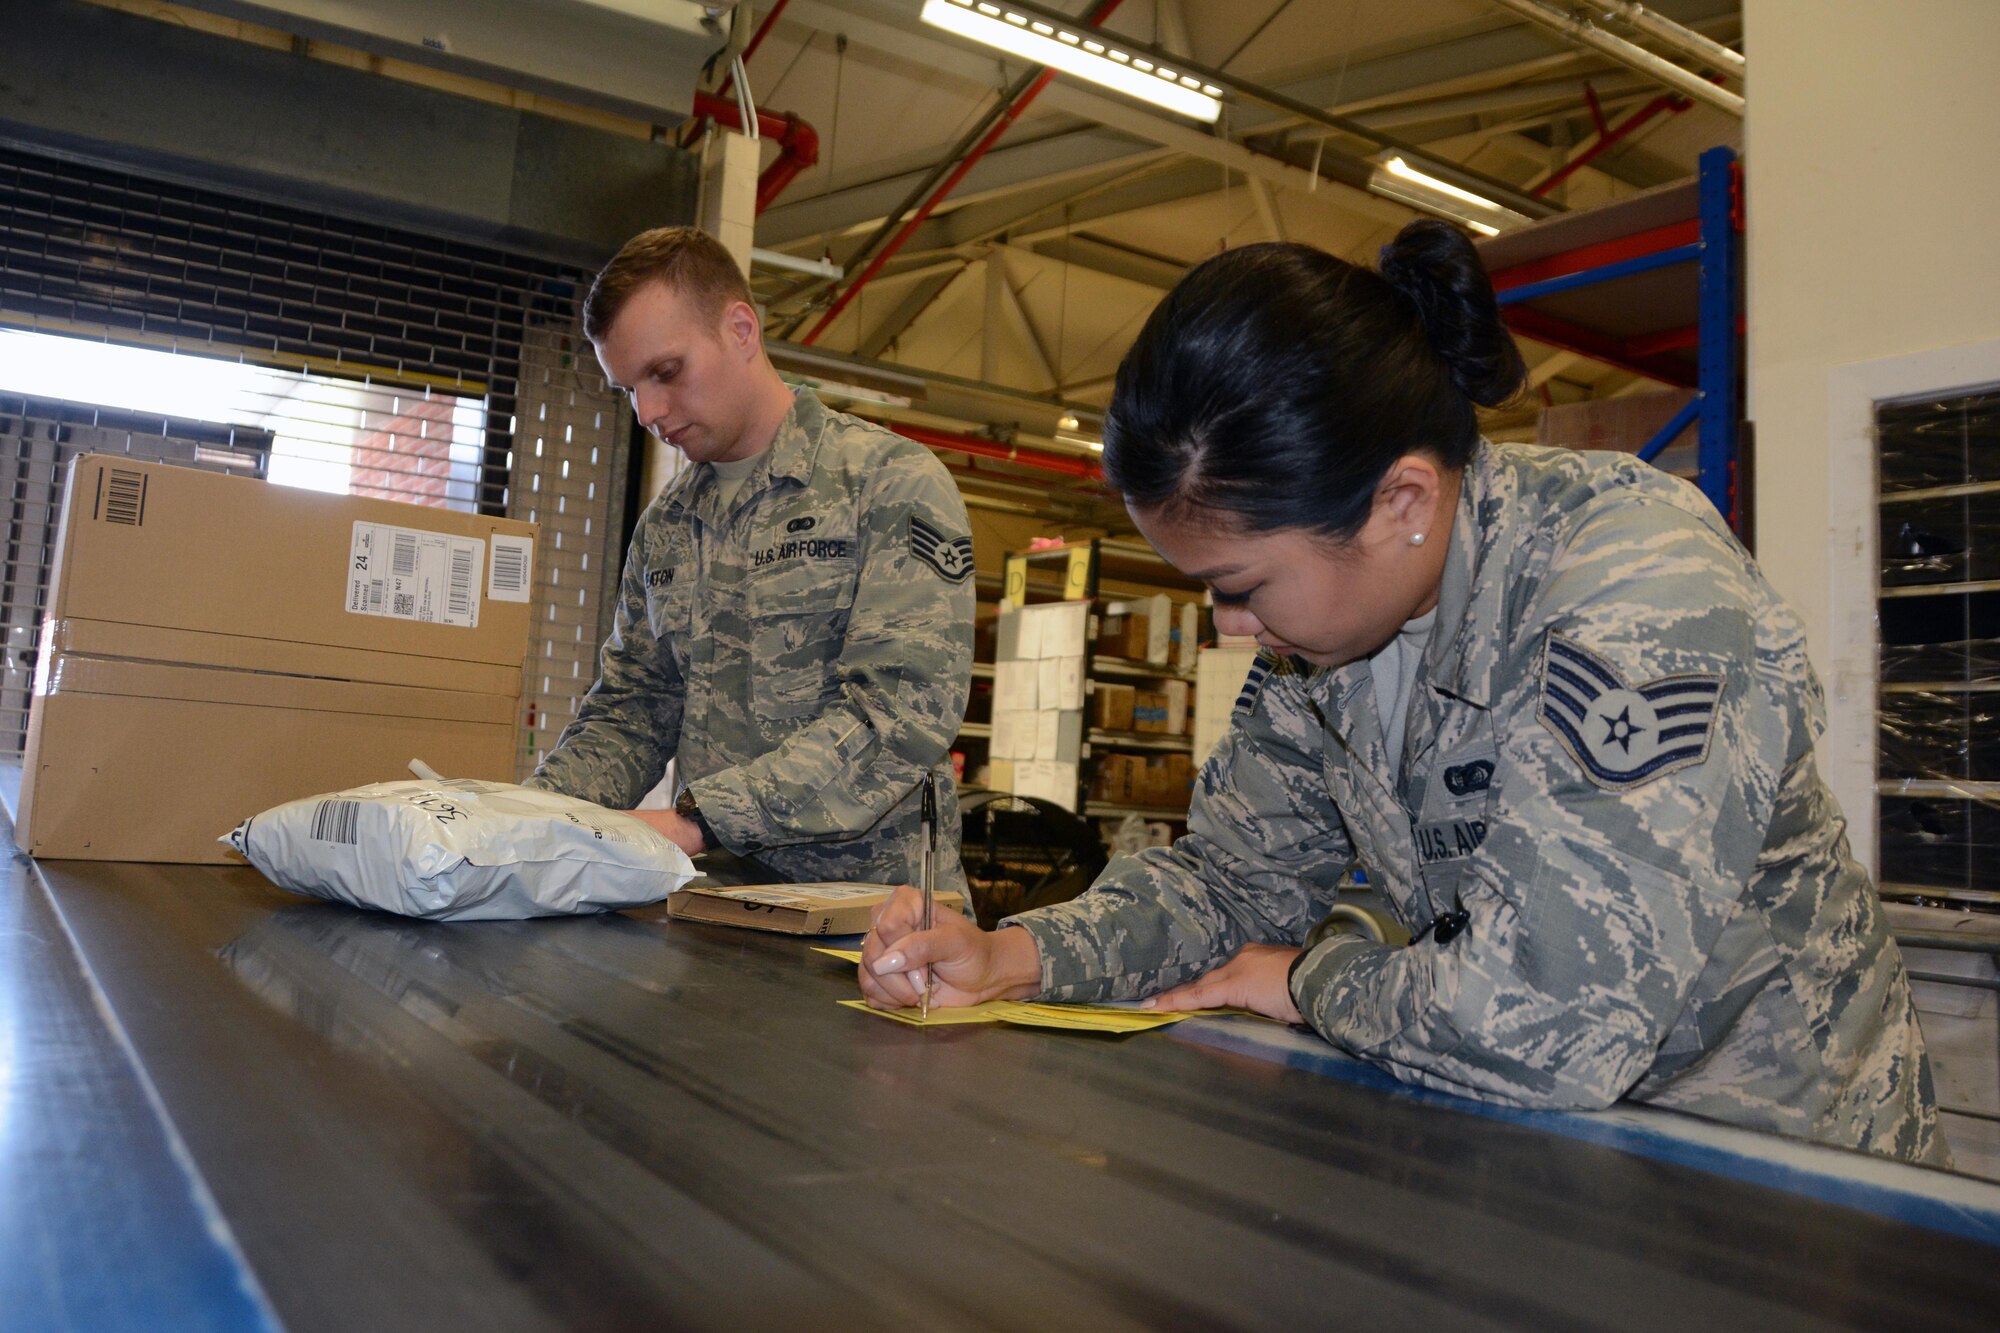 U.S. Air Force Staff Sgts. Douglas Eaton and Hyeyun Nam, 100th Communications Squadron Post Office postal clerks, work together to manually log in new parcels July 18, 2017, at RAF Mildenhall, England. The new system, scheduled to take effect Aug. 14, will allow email notifications to be sent to customers when their packages have arrived at the post office. (U.S. Air Force photo by Tech. Sgt. Lauren Gleason)